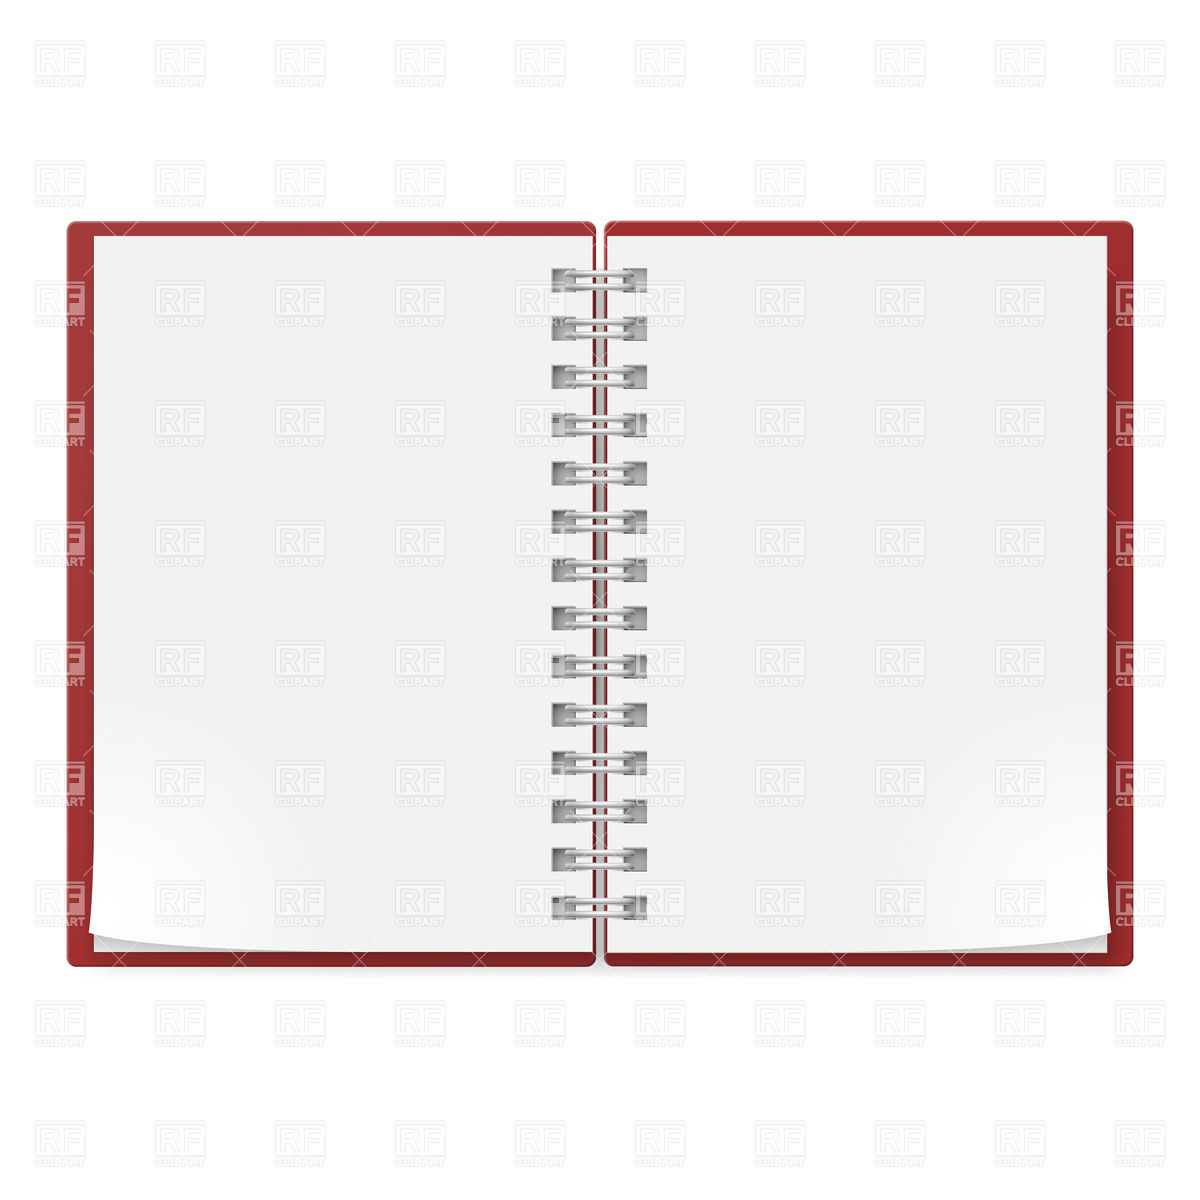 Open Spiral Notebook With Blank Pages Download Royalty Free Vector